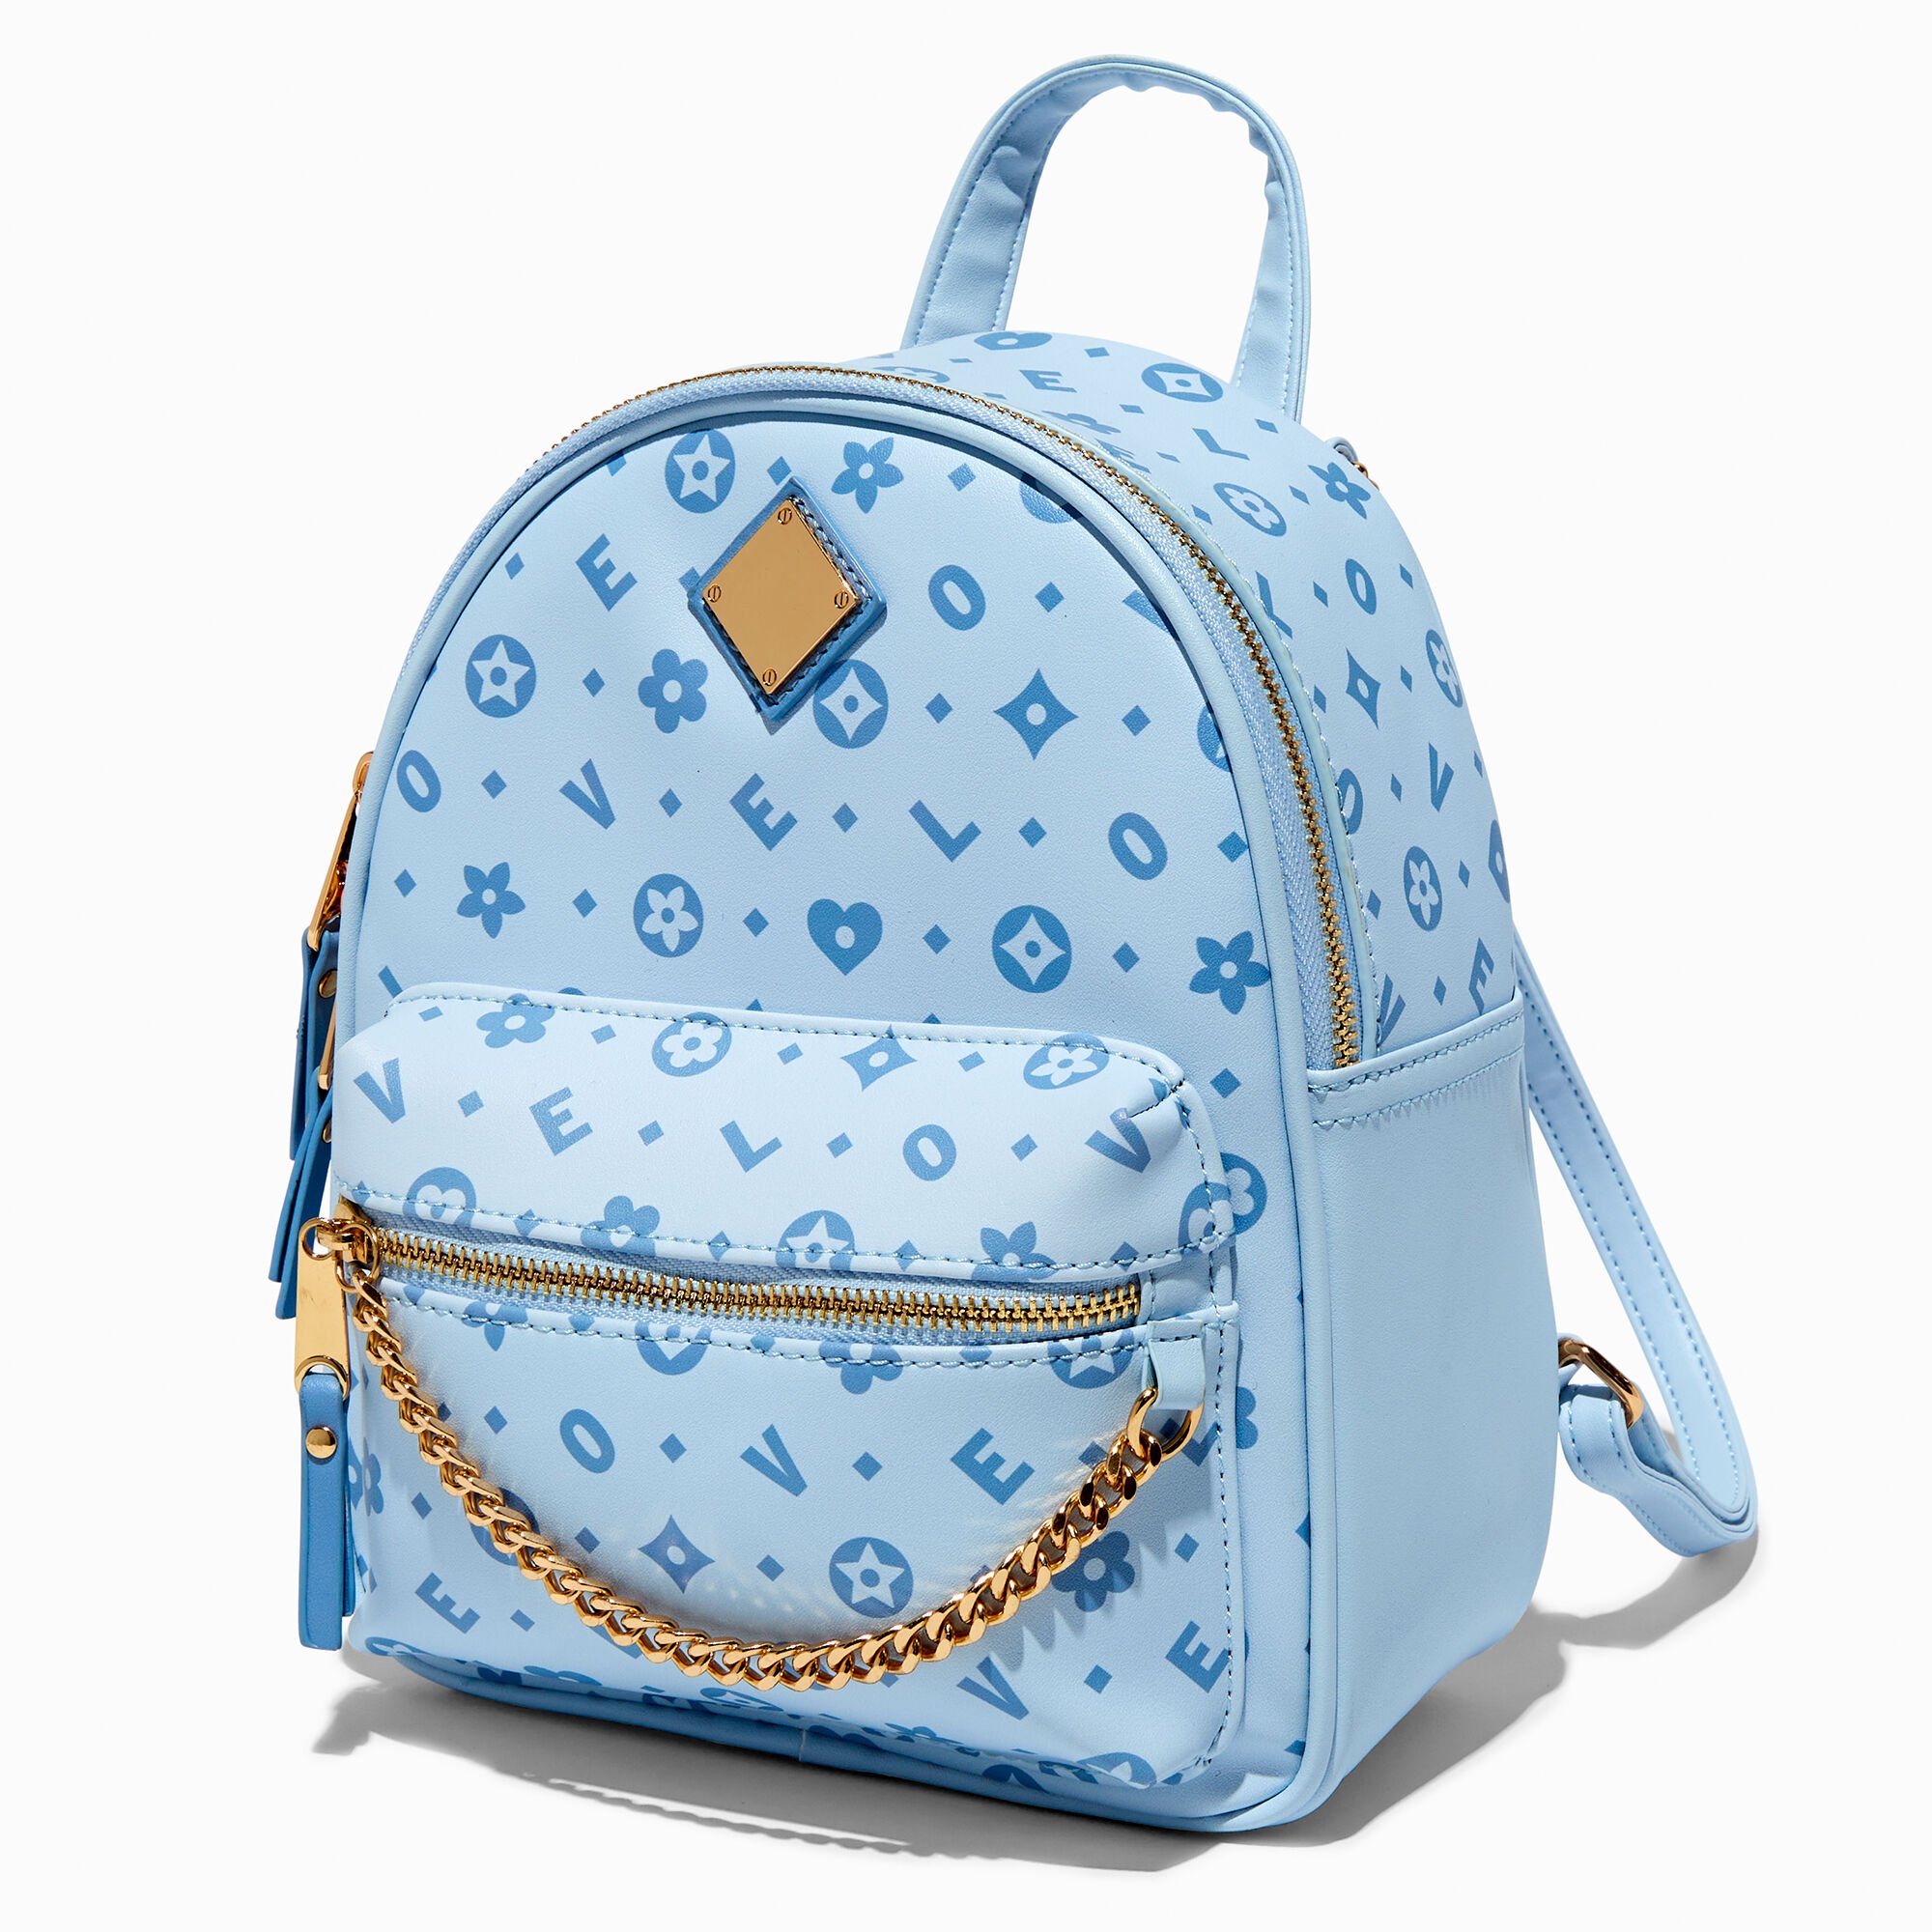 View Claires Status Icons Small Backpack Blue information